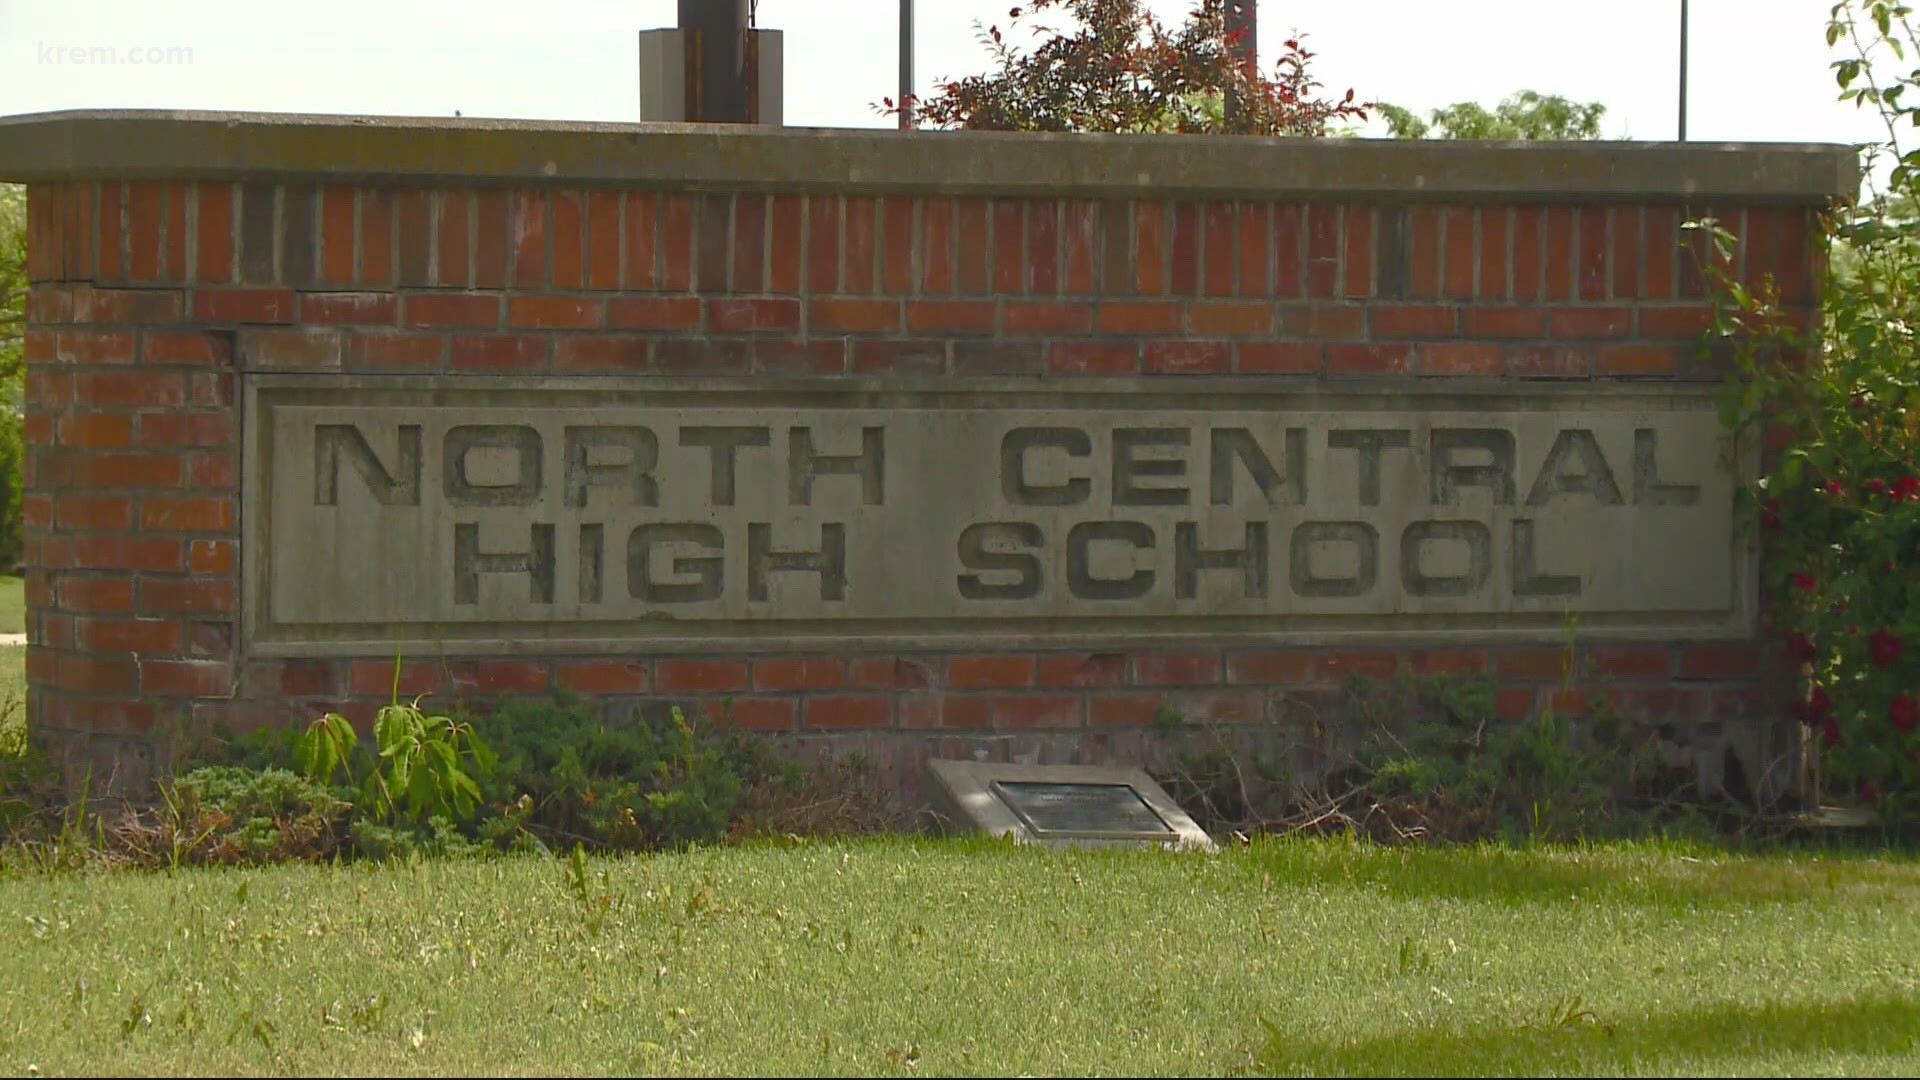 One student of North Central High school says he can't wait to get back in the classroom.